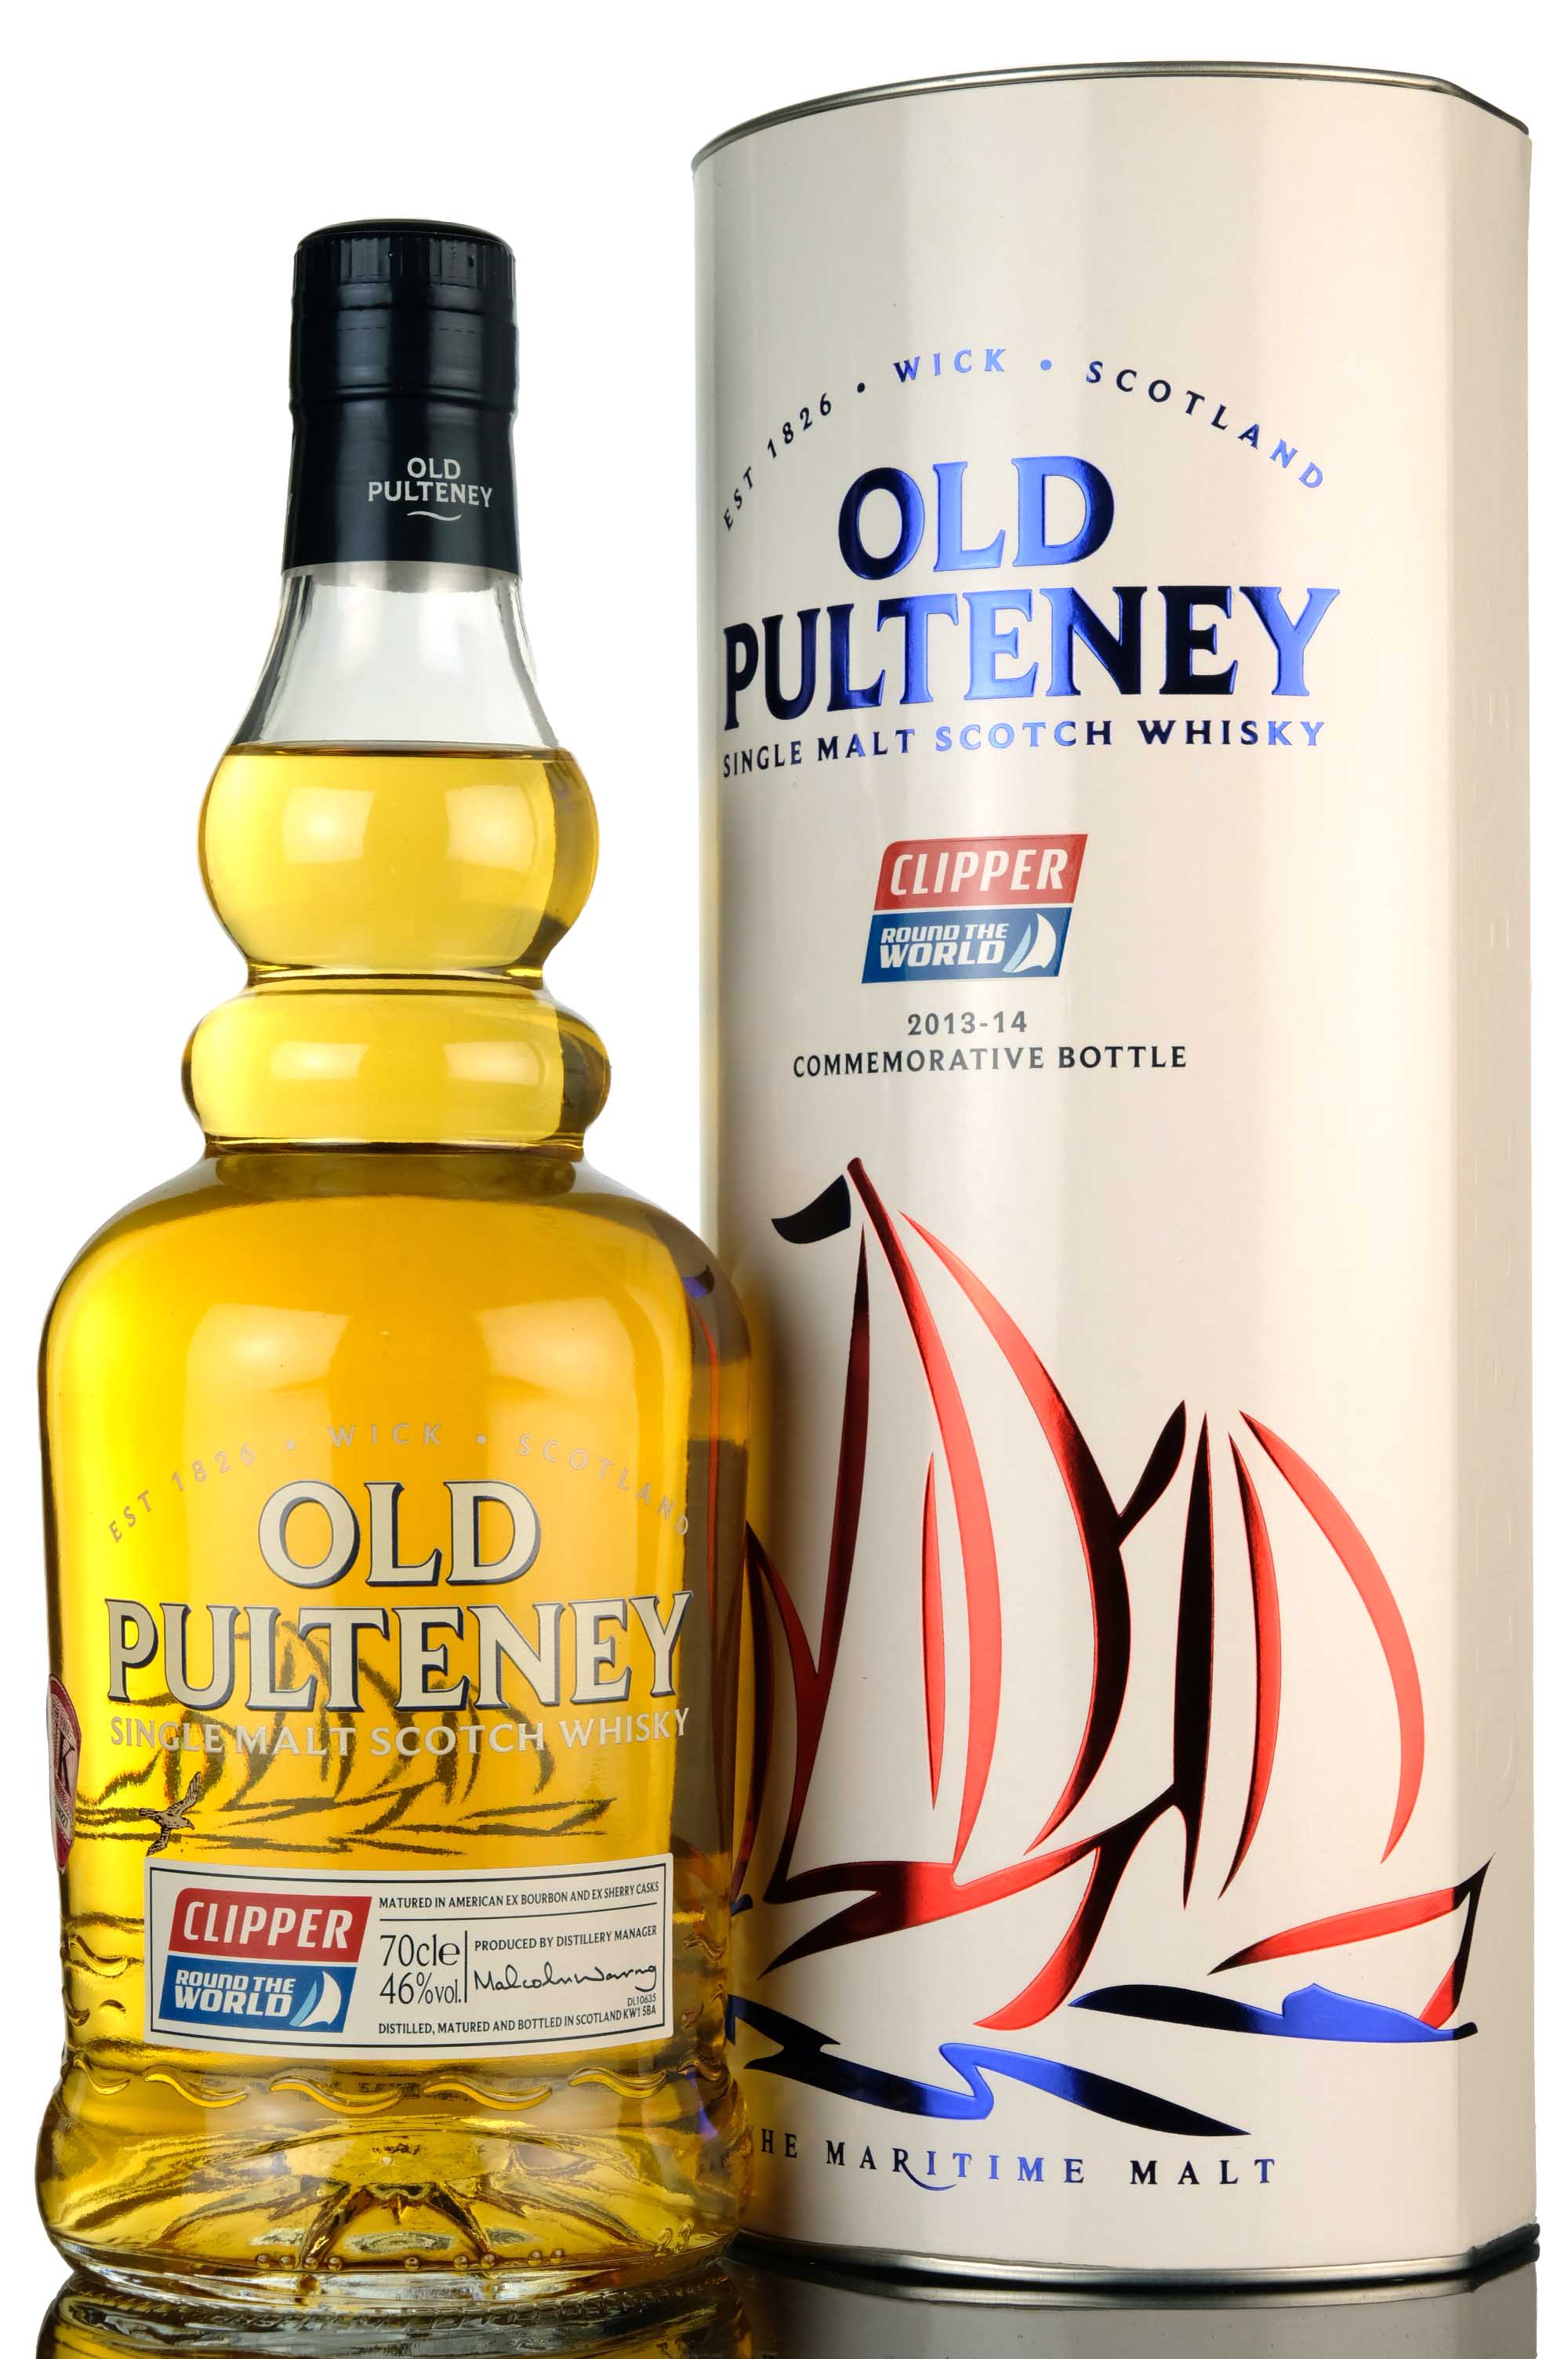 Old Pulteney Clipper Round The World 2013-2014 Commemorative Bottle